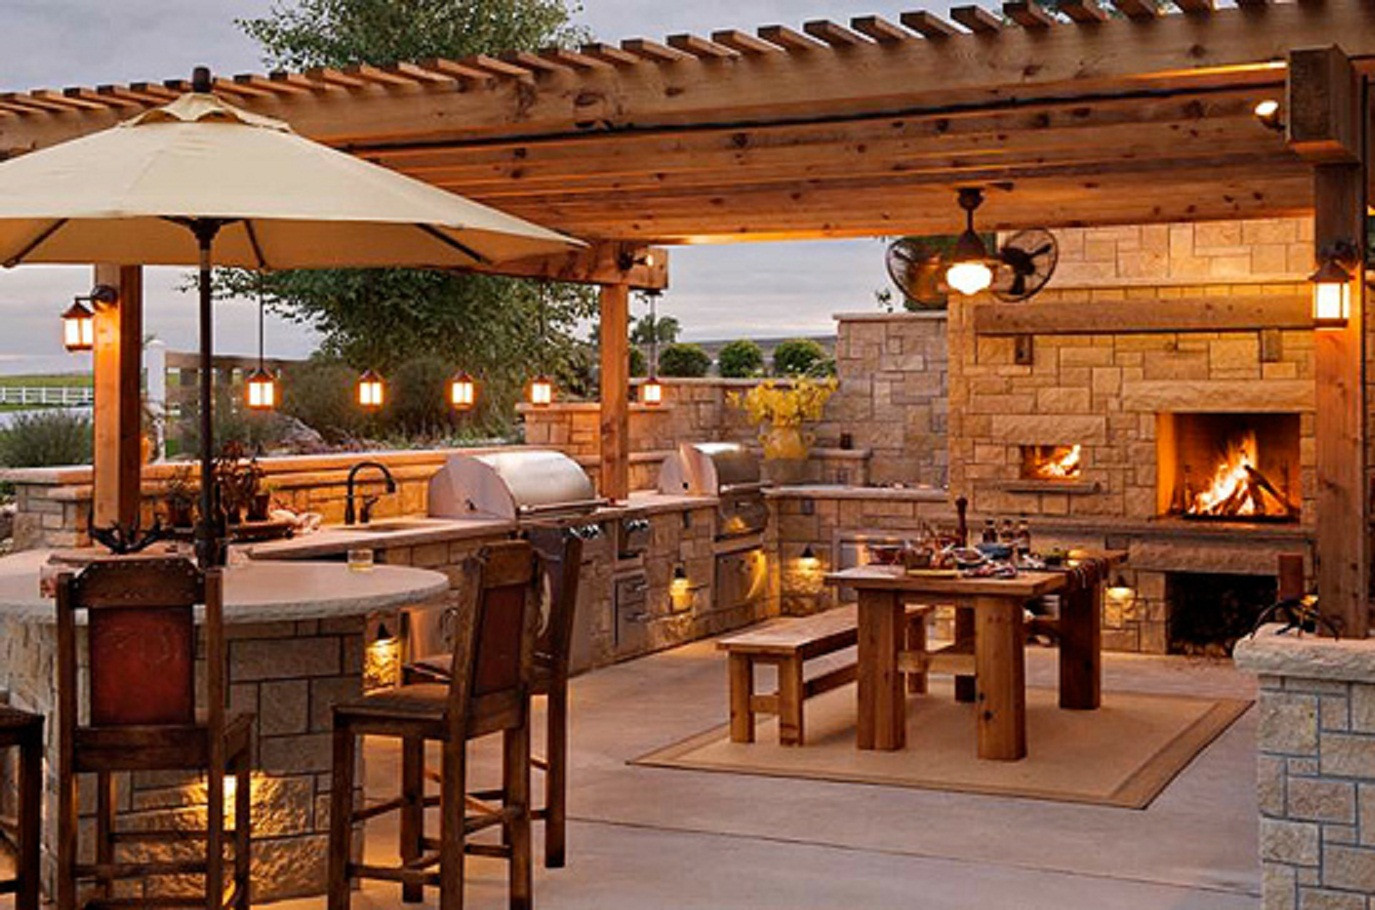 Outdoor Kitchens Ideas
 How to Design Your Perfect Outdoor kitchen Outdoor